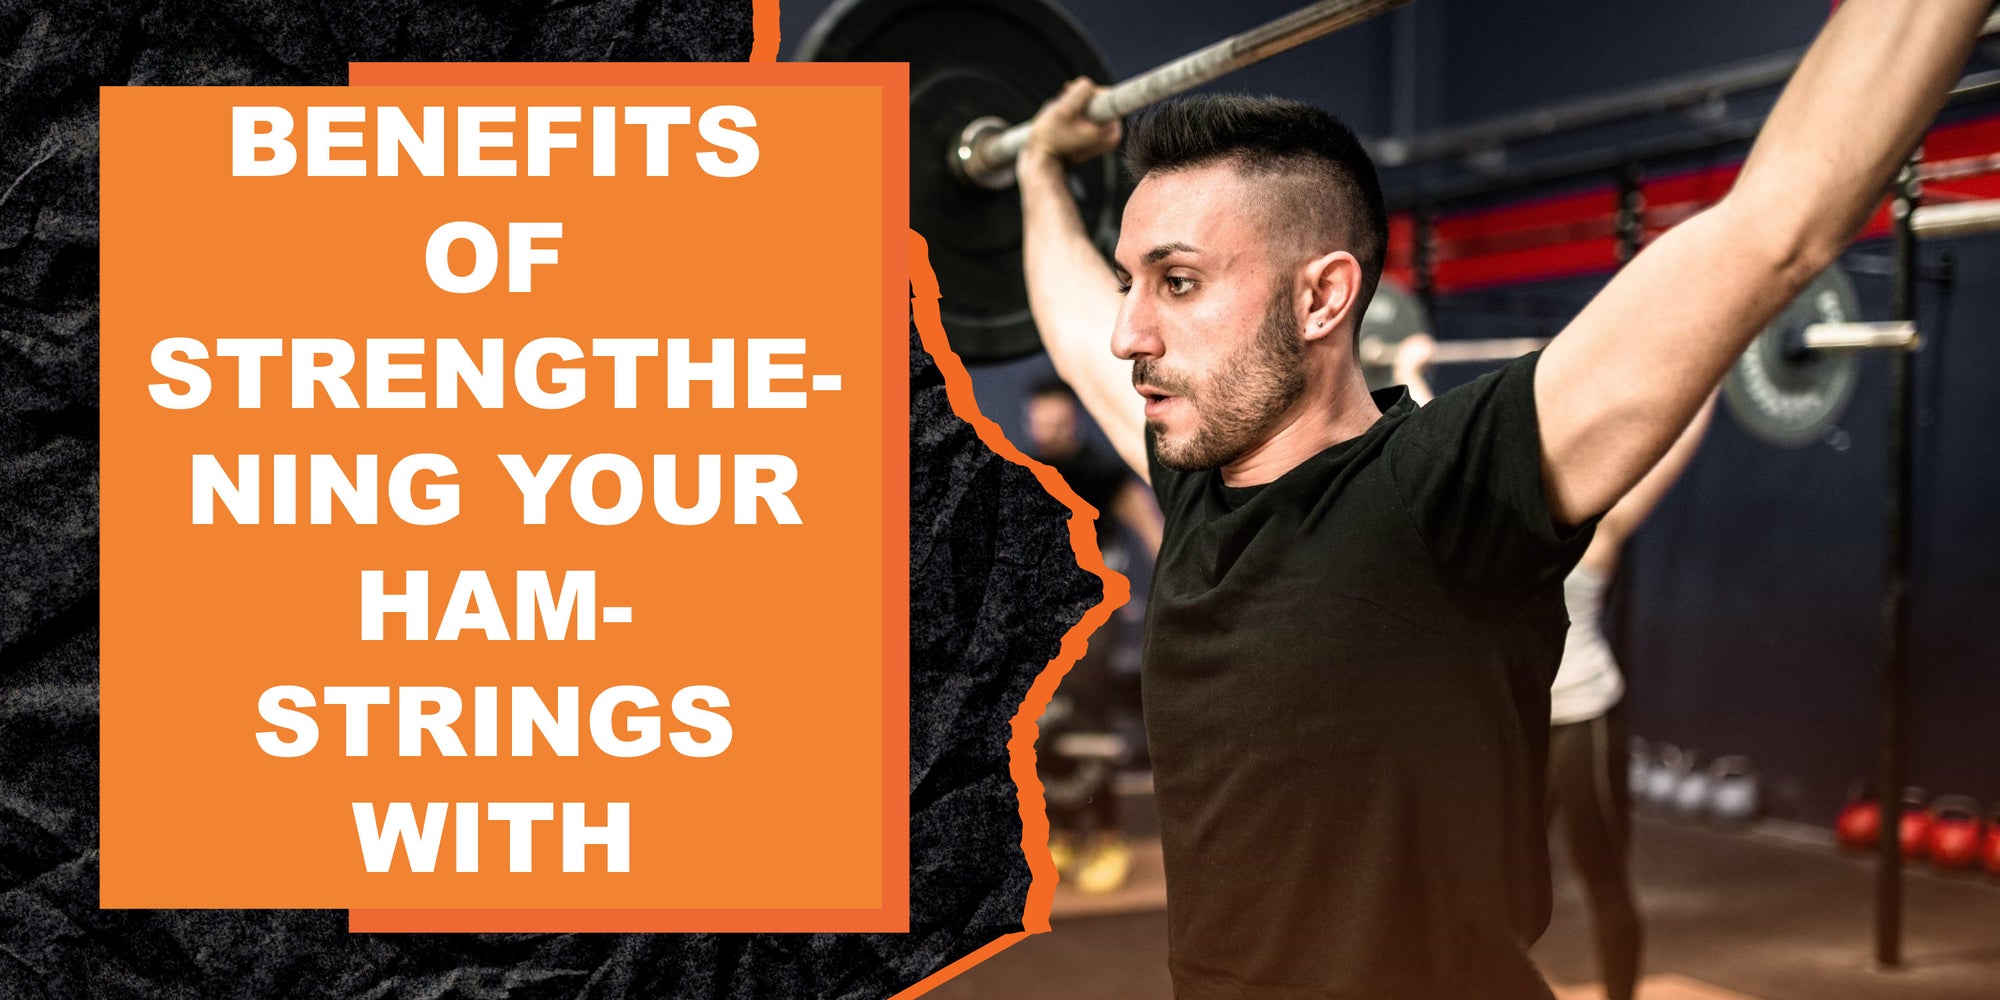 The Benefits of Strengthening Your Hamstrings with Weight Training